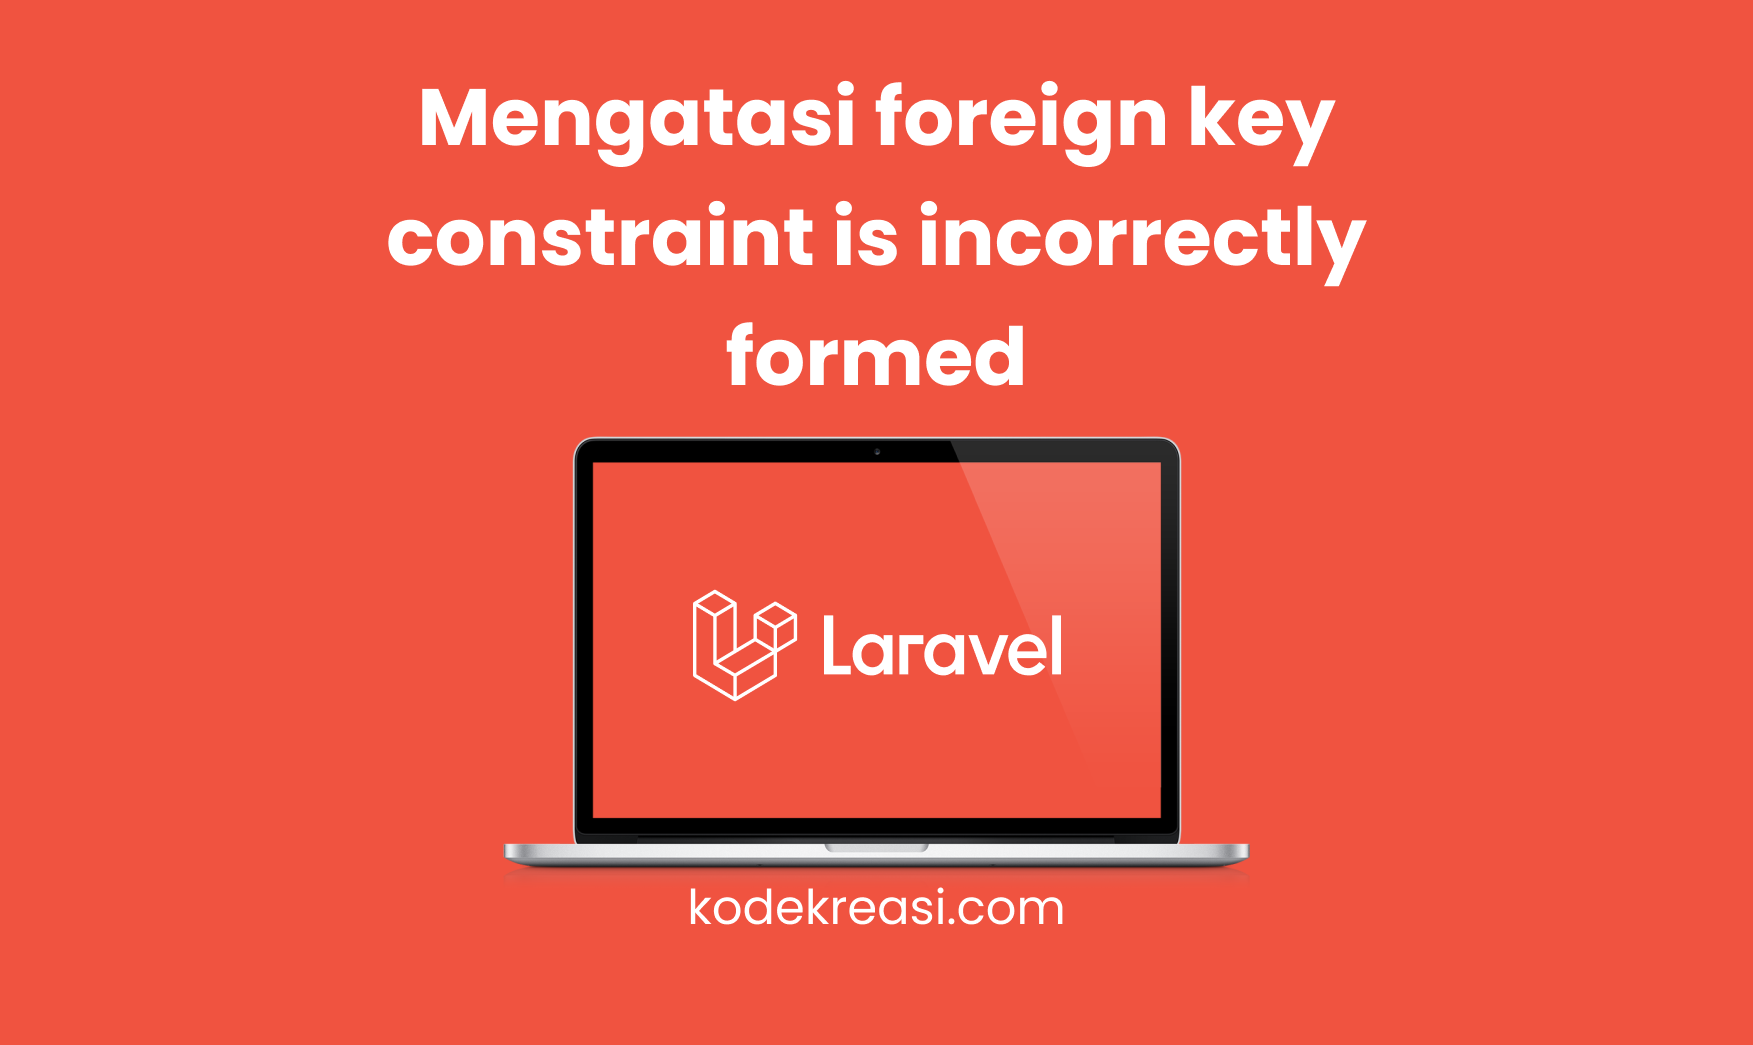 Mengatasi foreign key constraint is incorrectly formed